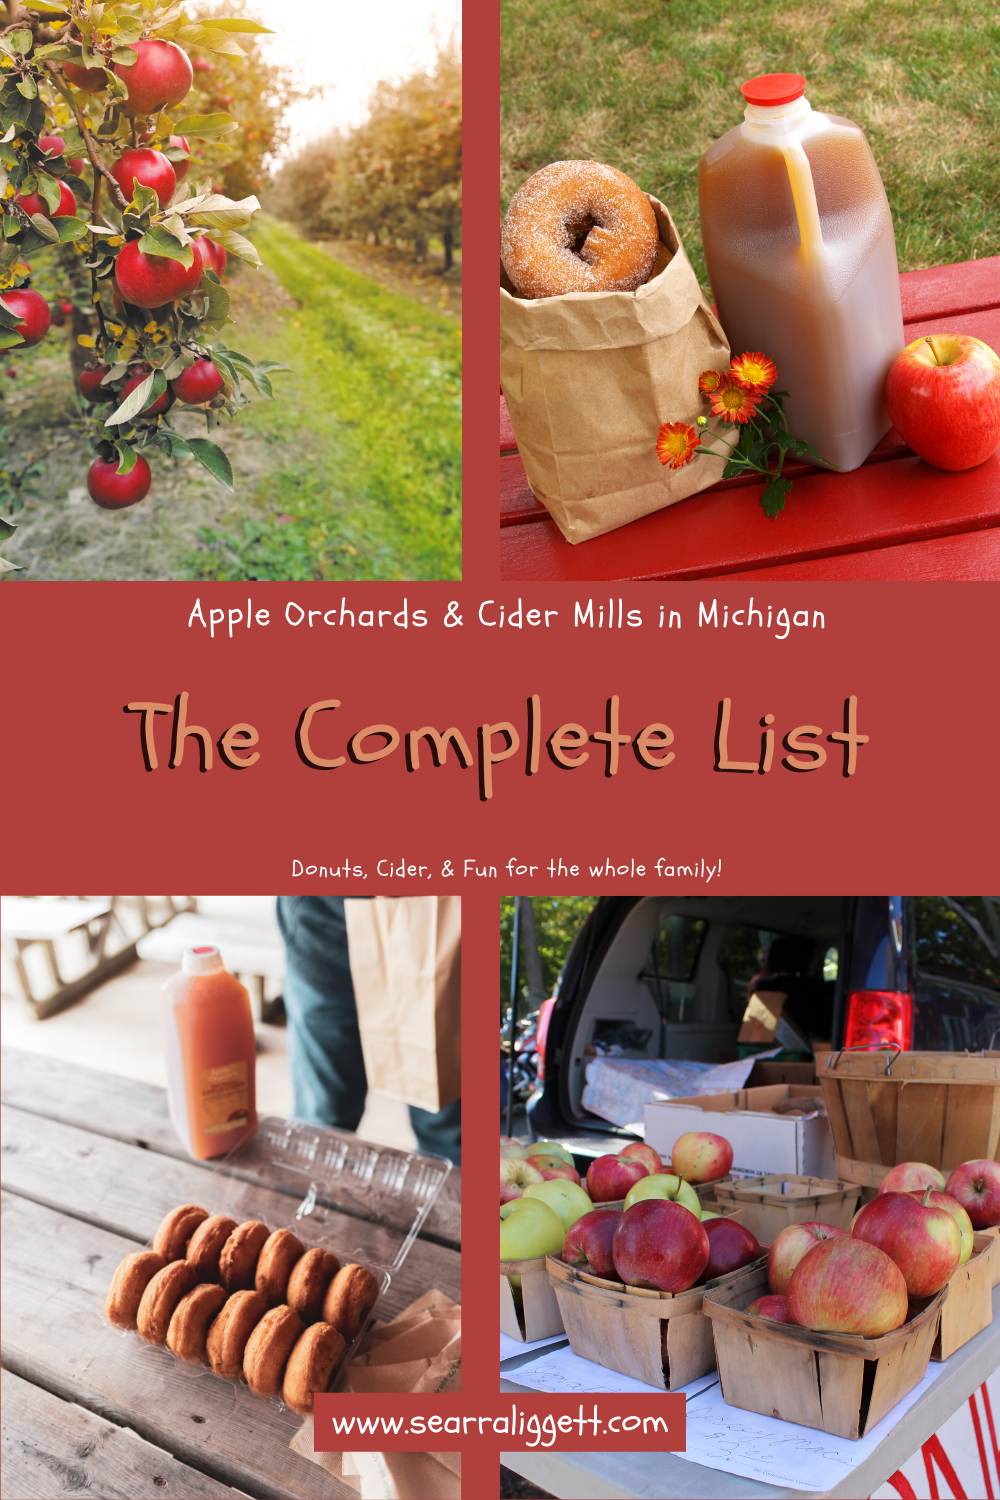 How to Keep Cut Apples Fresh - Robinette's Apple Haus & Winery